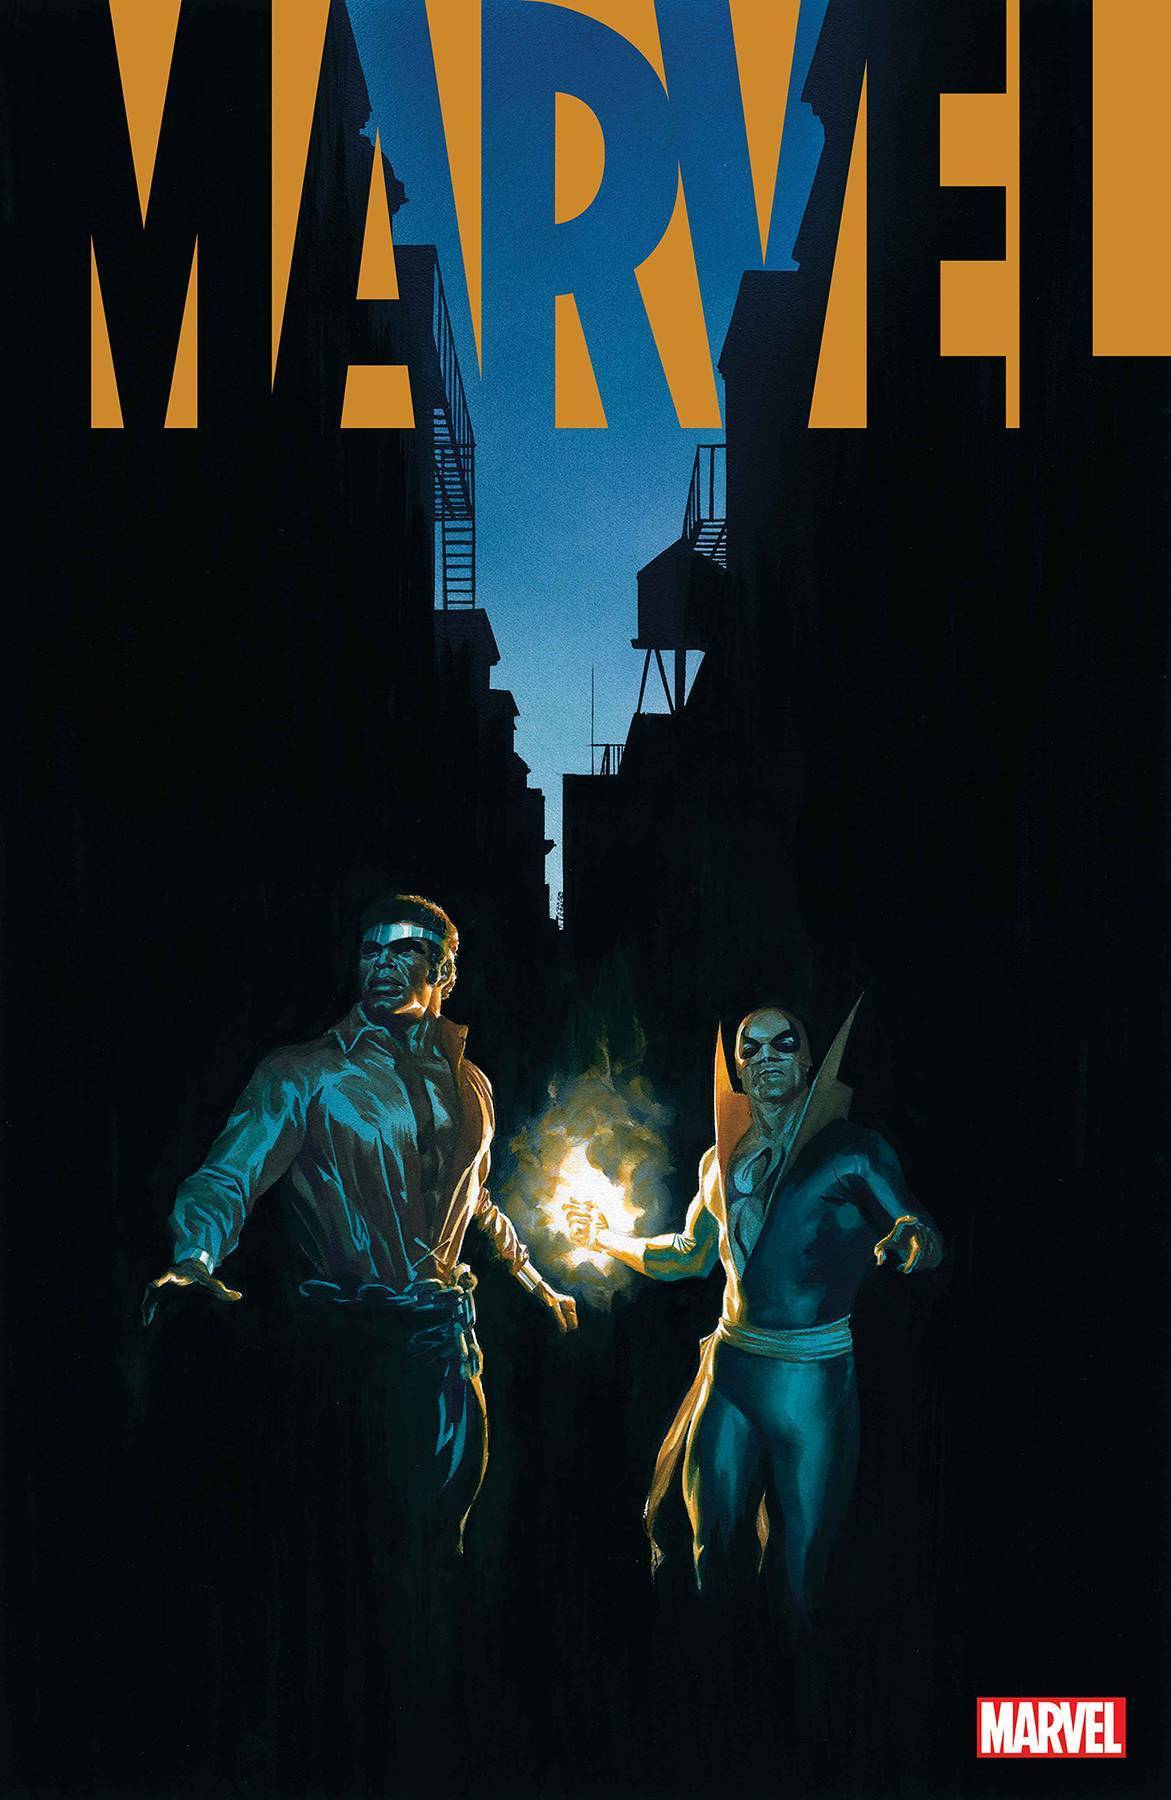 Marvel #3 (Of 6) (12/23/2020) %product_vendow% - The One Stop Shop Comics & Games